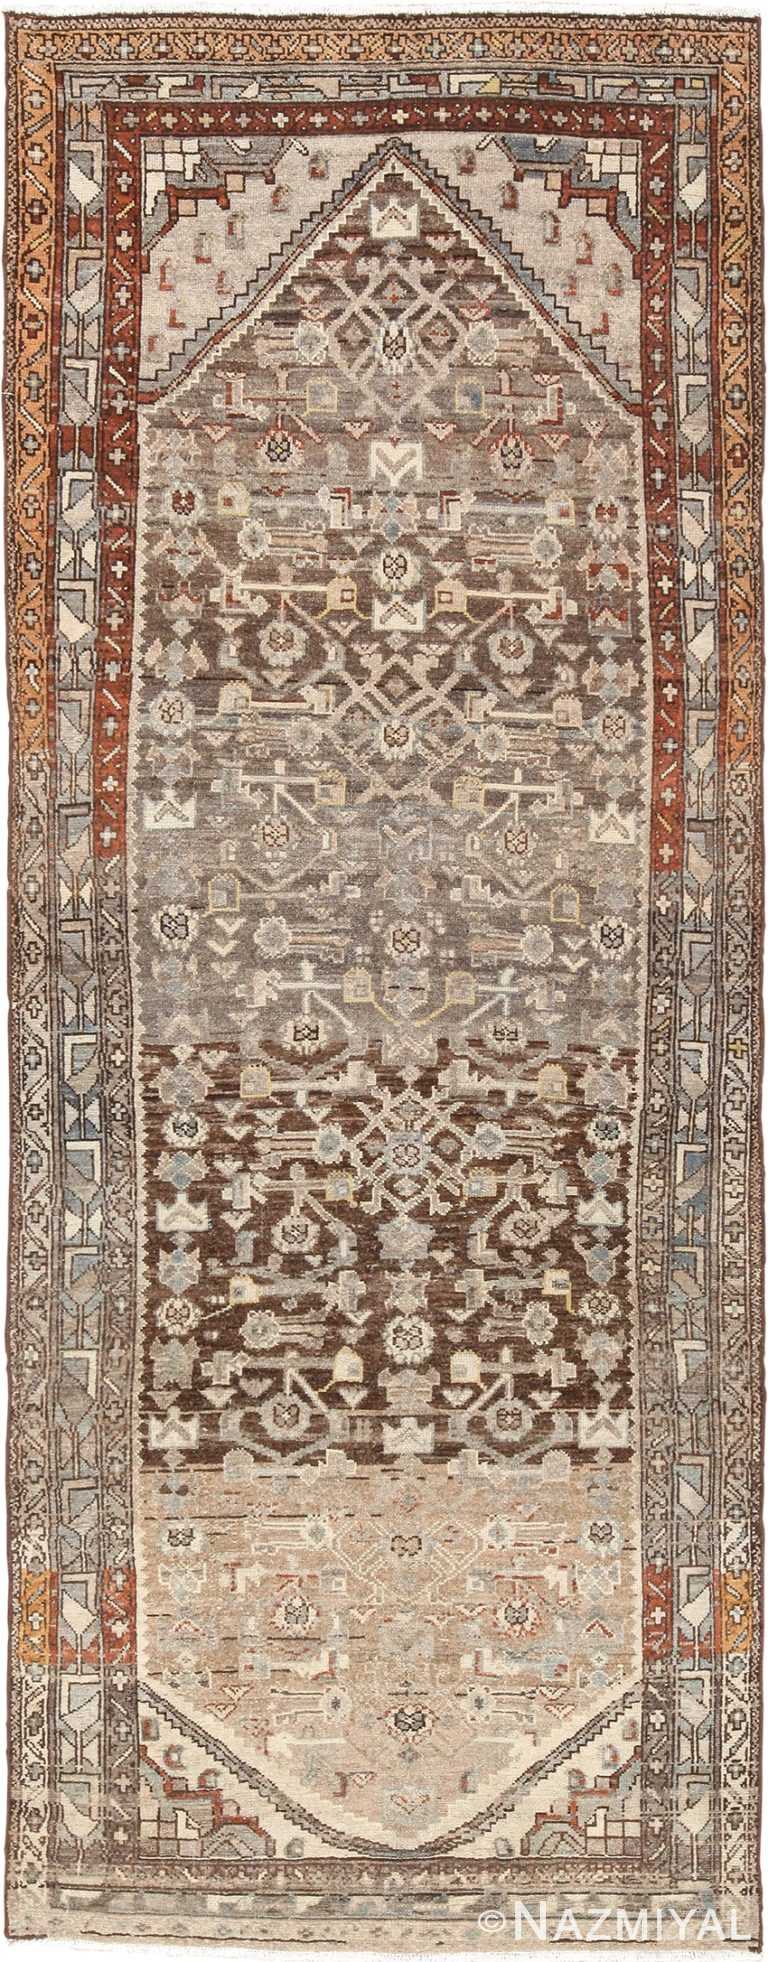 Geometric Designed Antique Tribal Persian Malayer Runner Rug 49629 by Nazmiyal